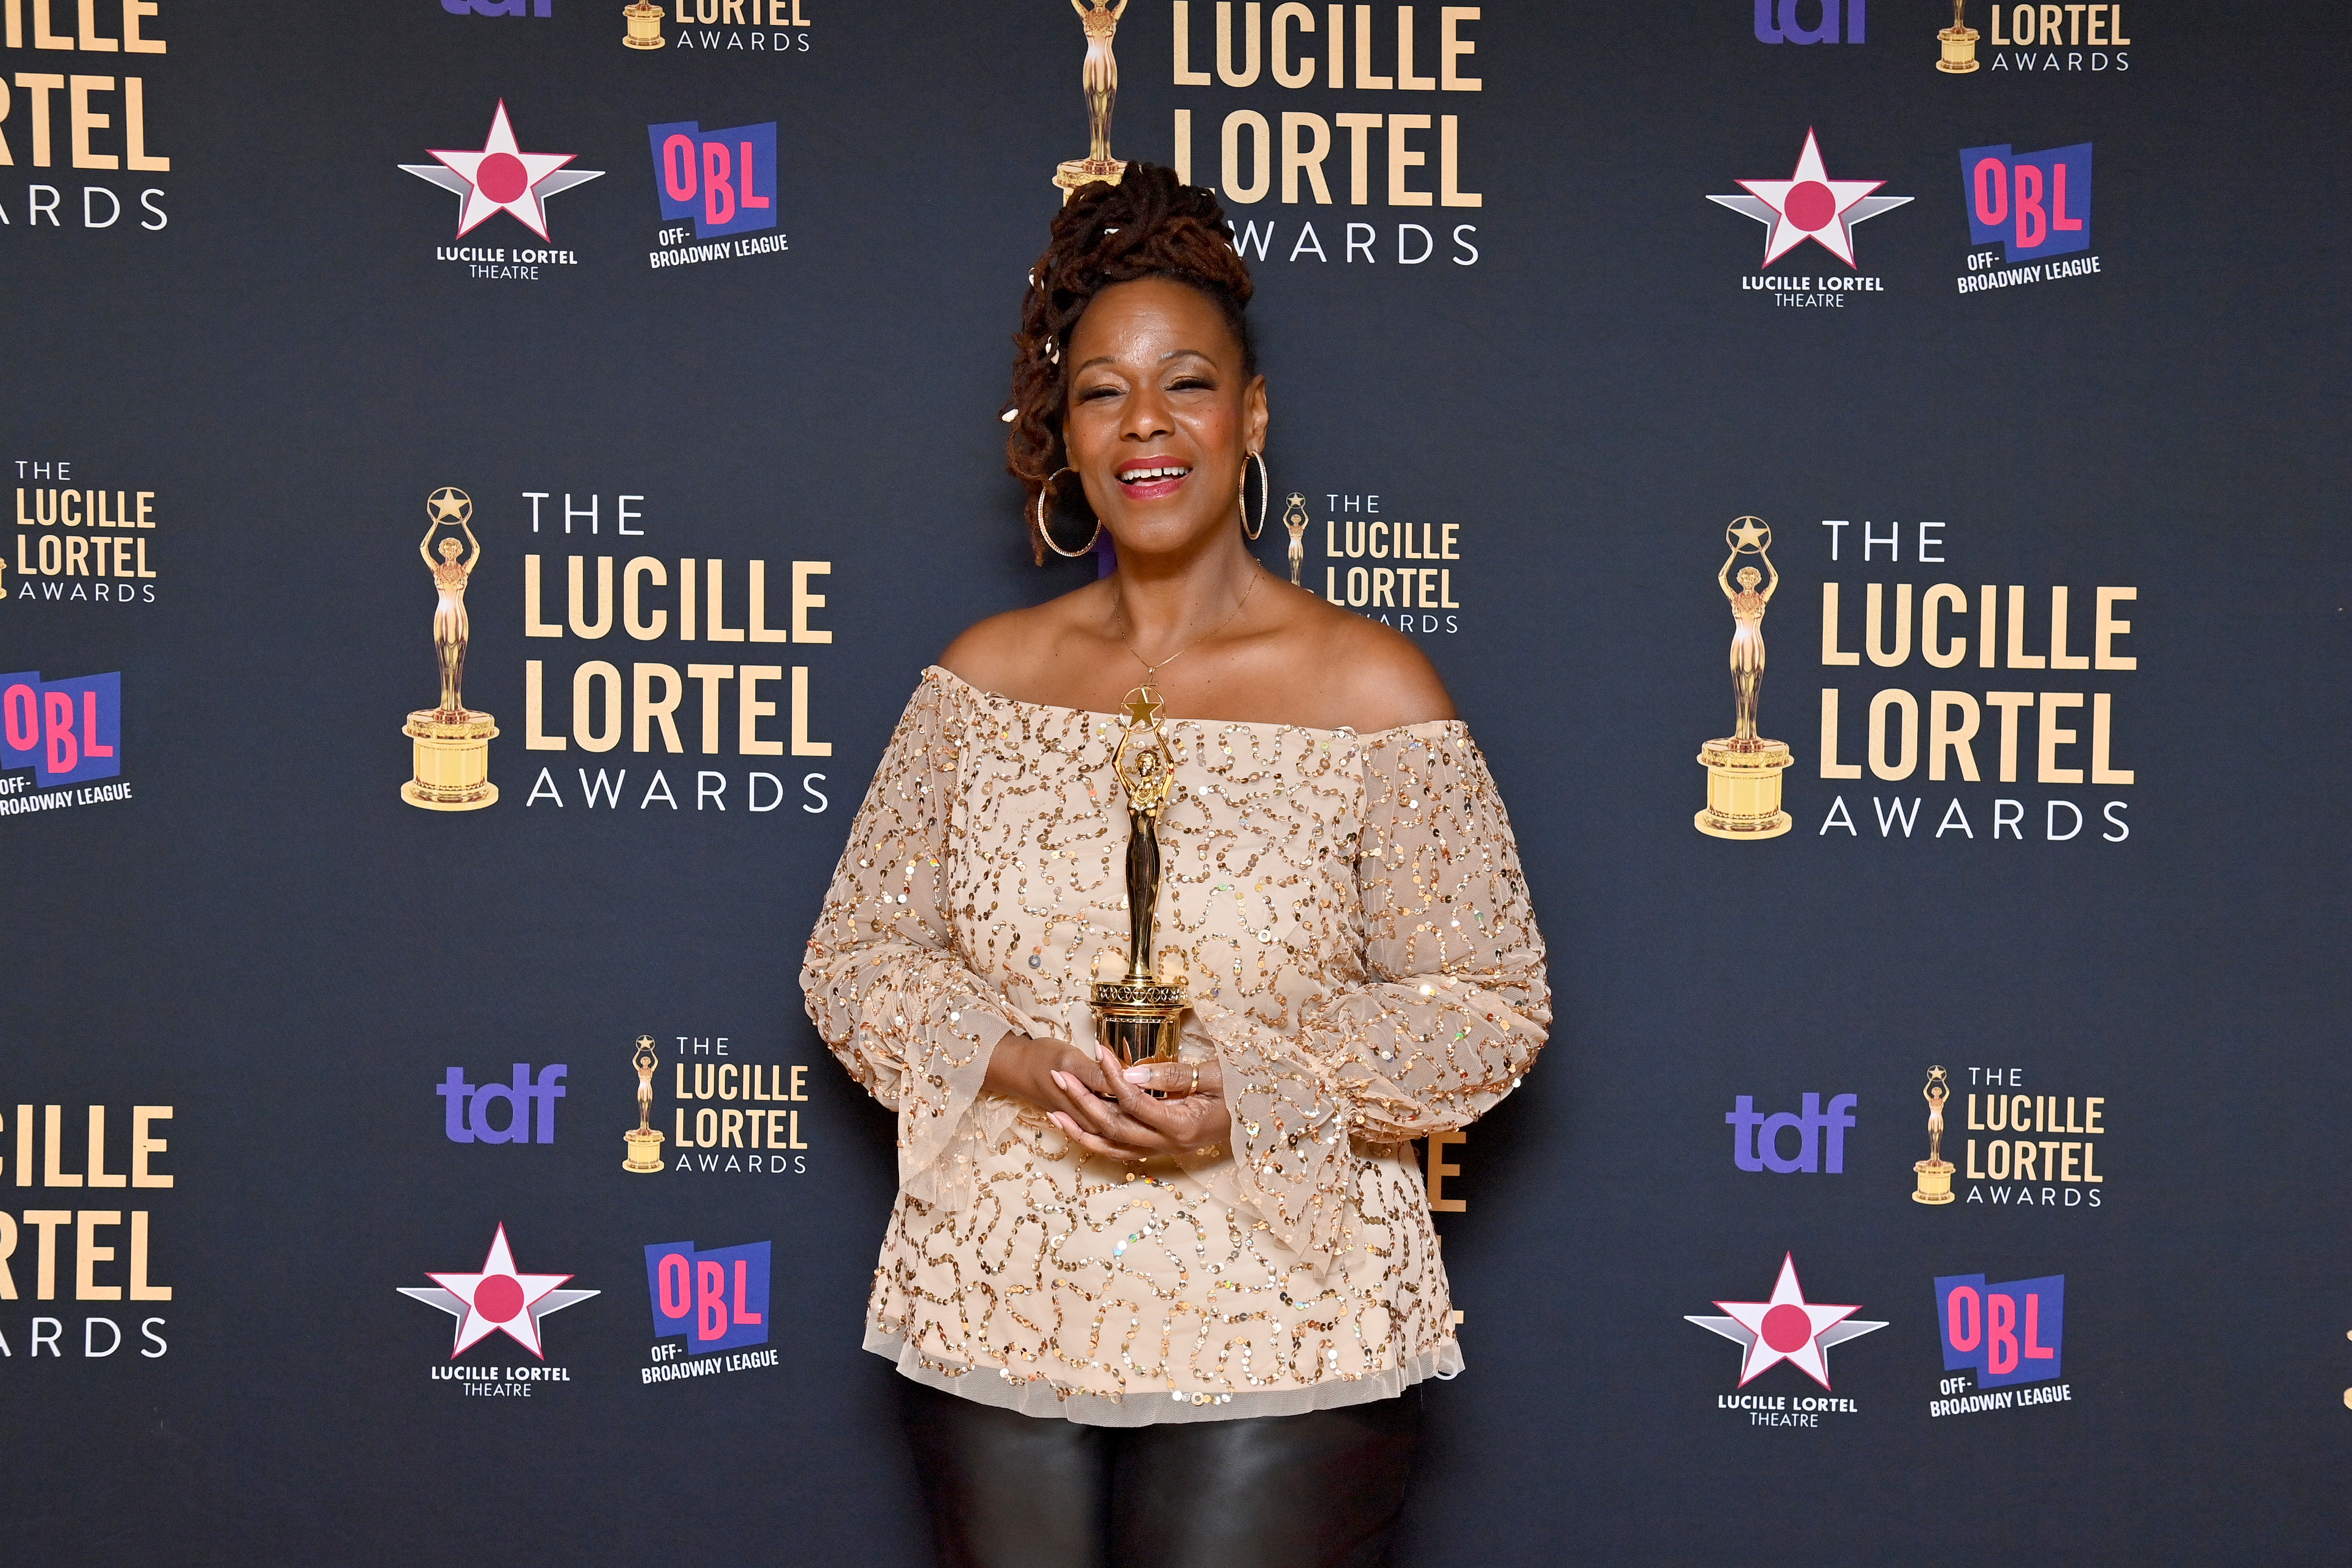 39th Annual Lucille Lortel Awards